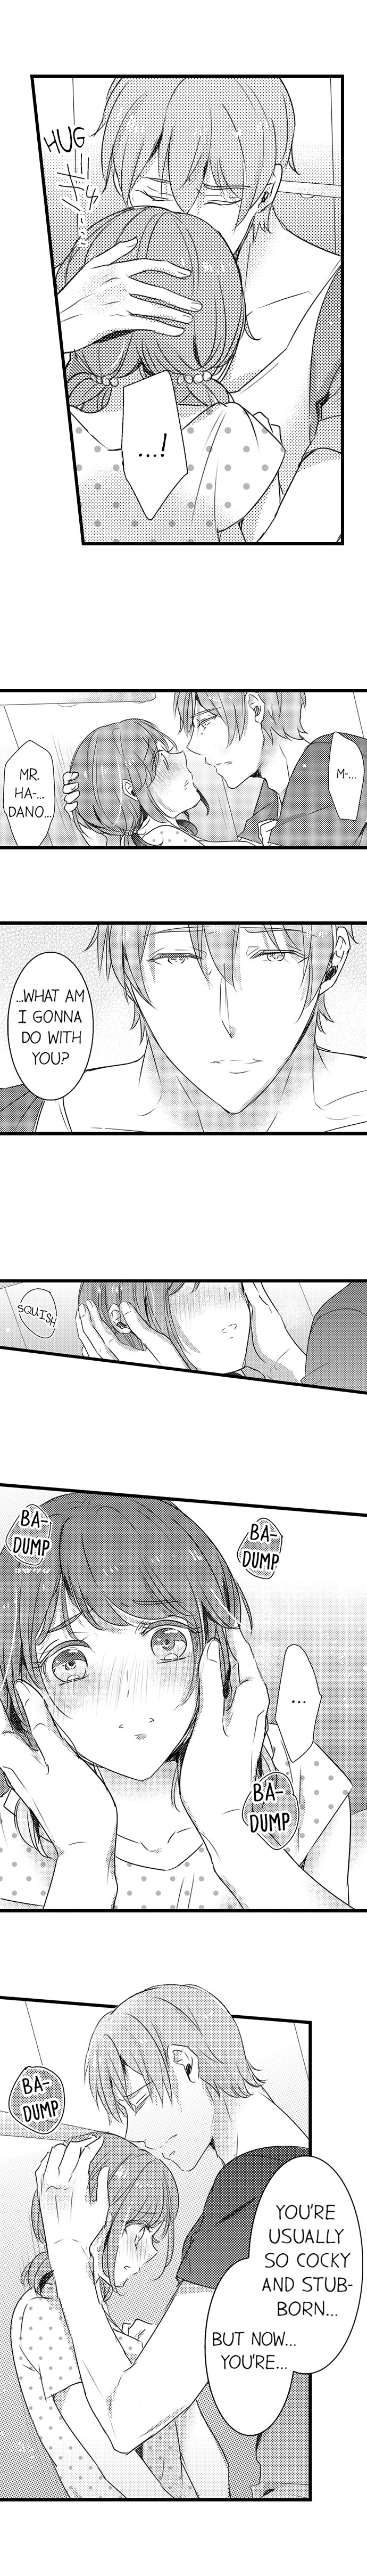 A Hot Night With My Boss in a Capsule Hotel - Chapter 30 Page 6